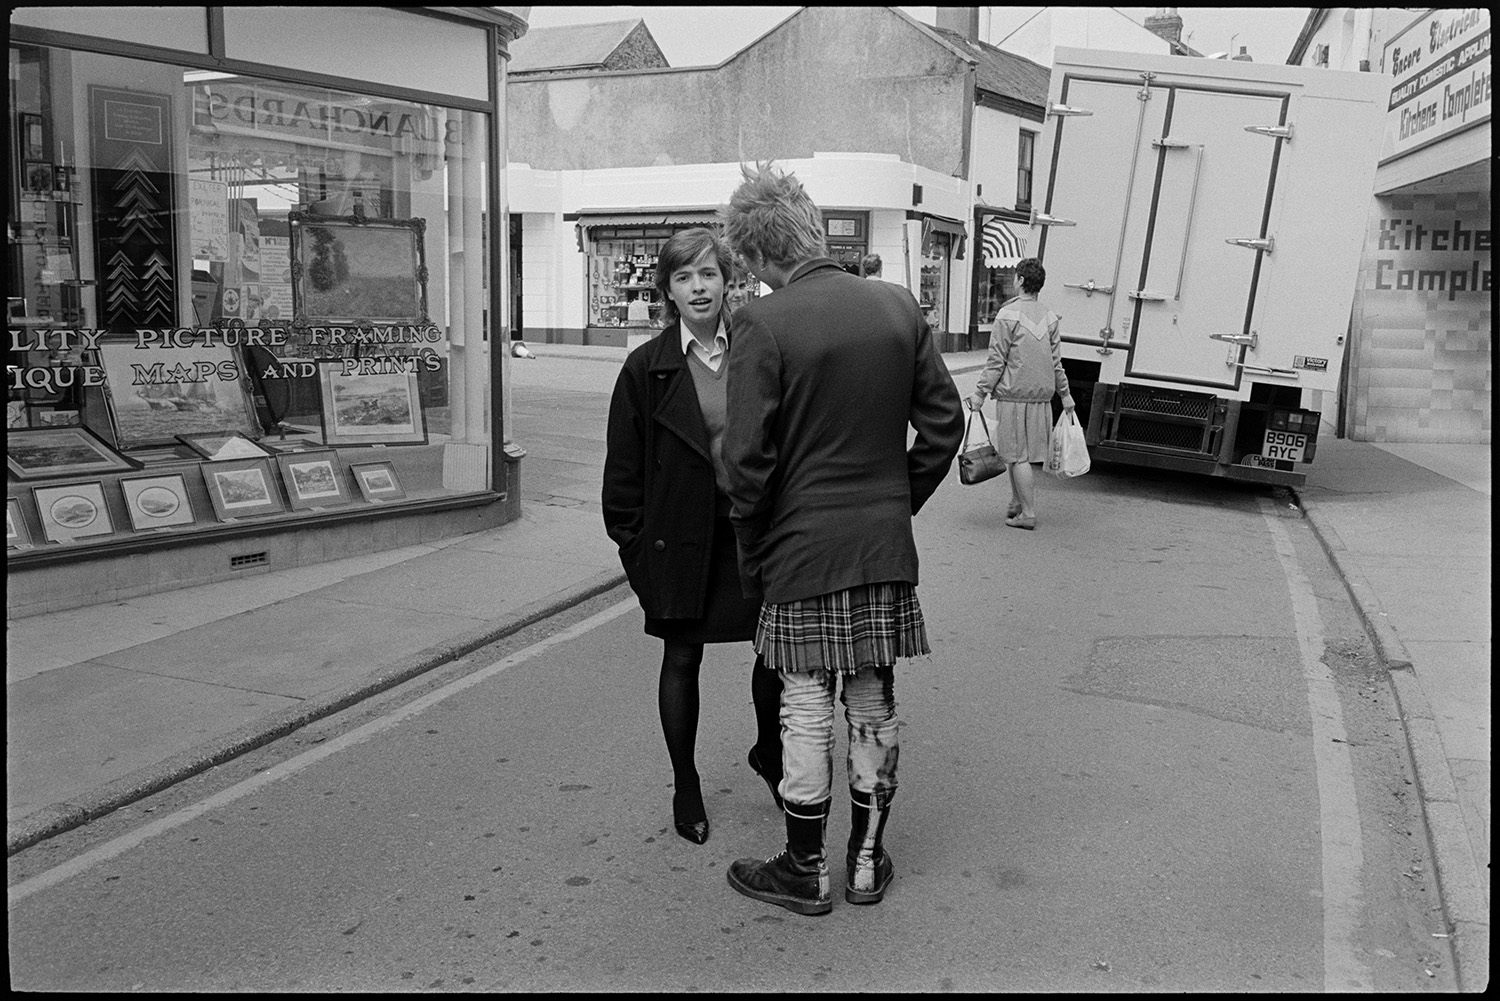 A young woman talking to a punk in a street outside a picture framing shop, possibly in Bideford. Other shop fronts and a lorry can be seen in the background.